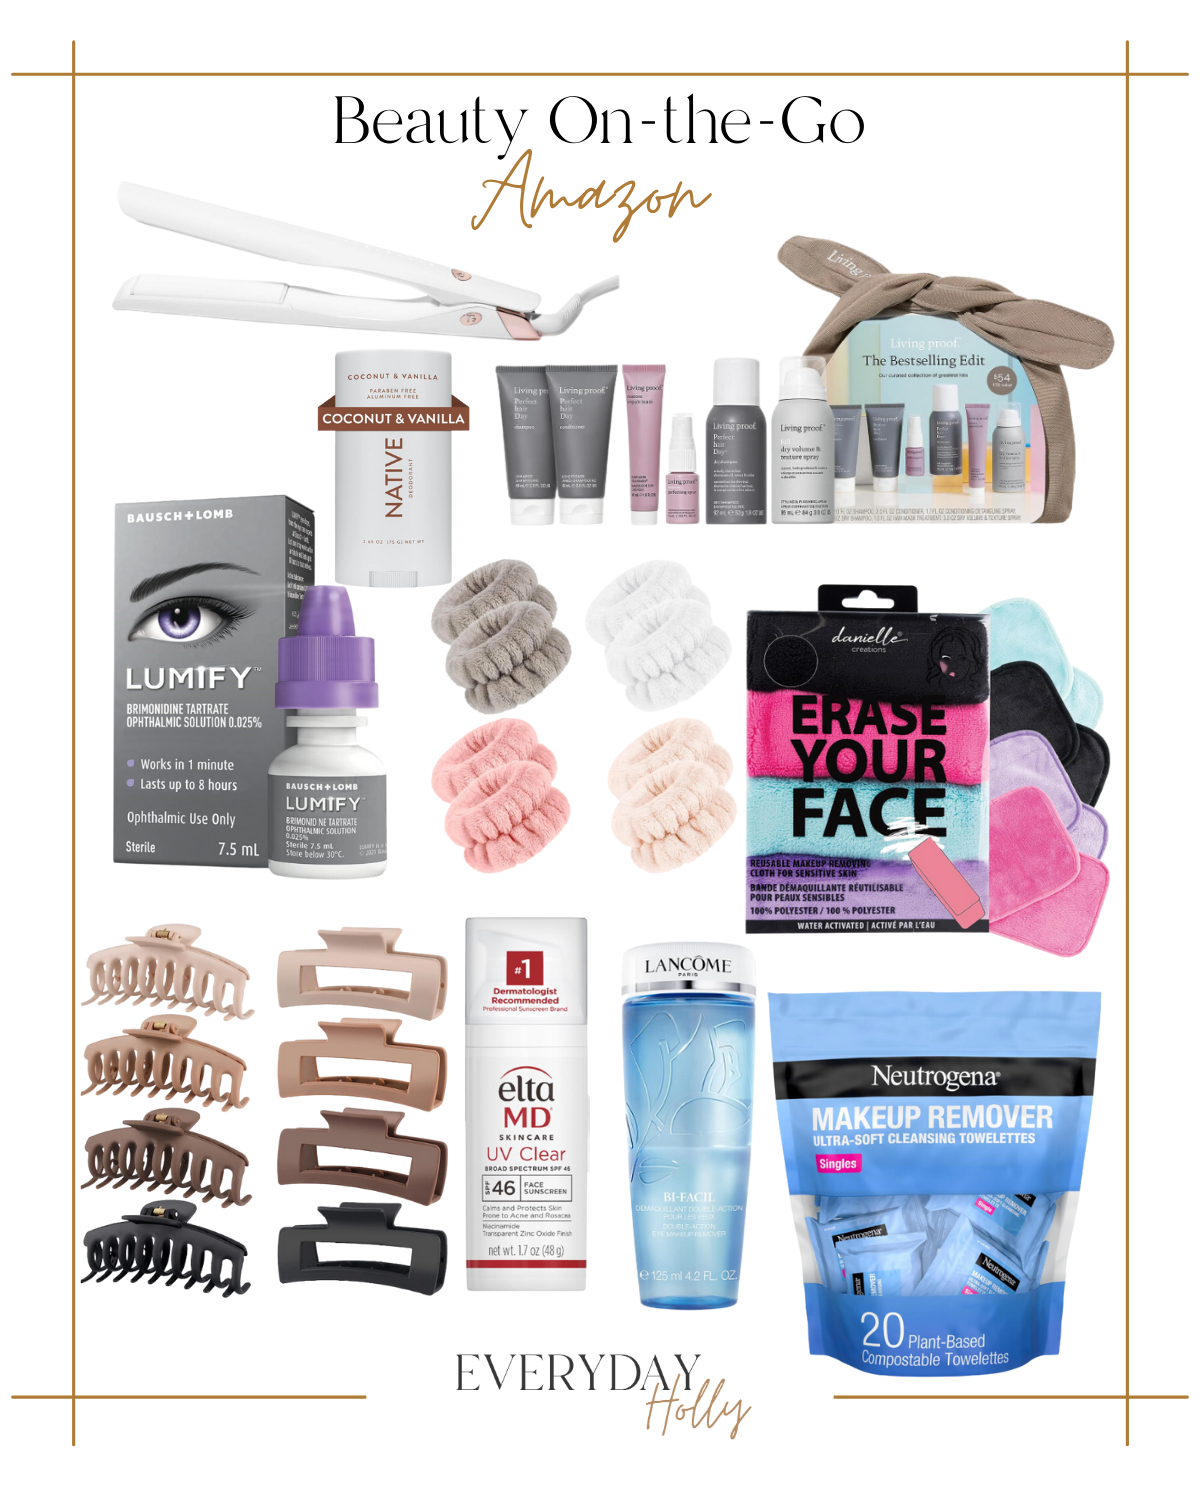 The Best Styles for Every Occasion + Travel Essentials | #best #styles #every #occasion #travel #essentials #musthaves #makeup #beauty #skincare #selfcare #haircare #hottools #clawclips #makeupremover #eyedrops